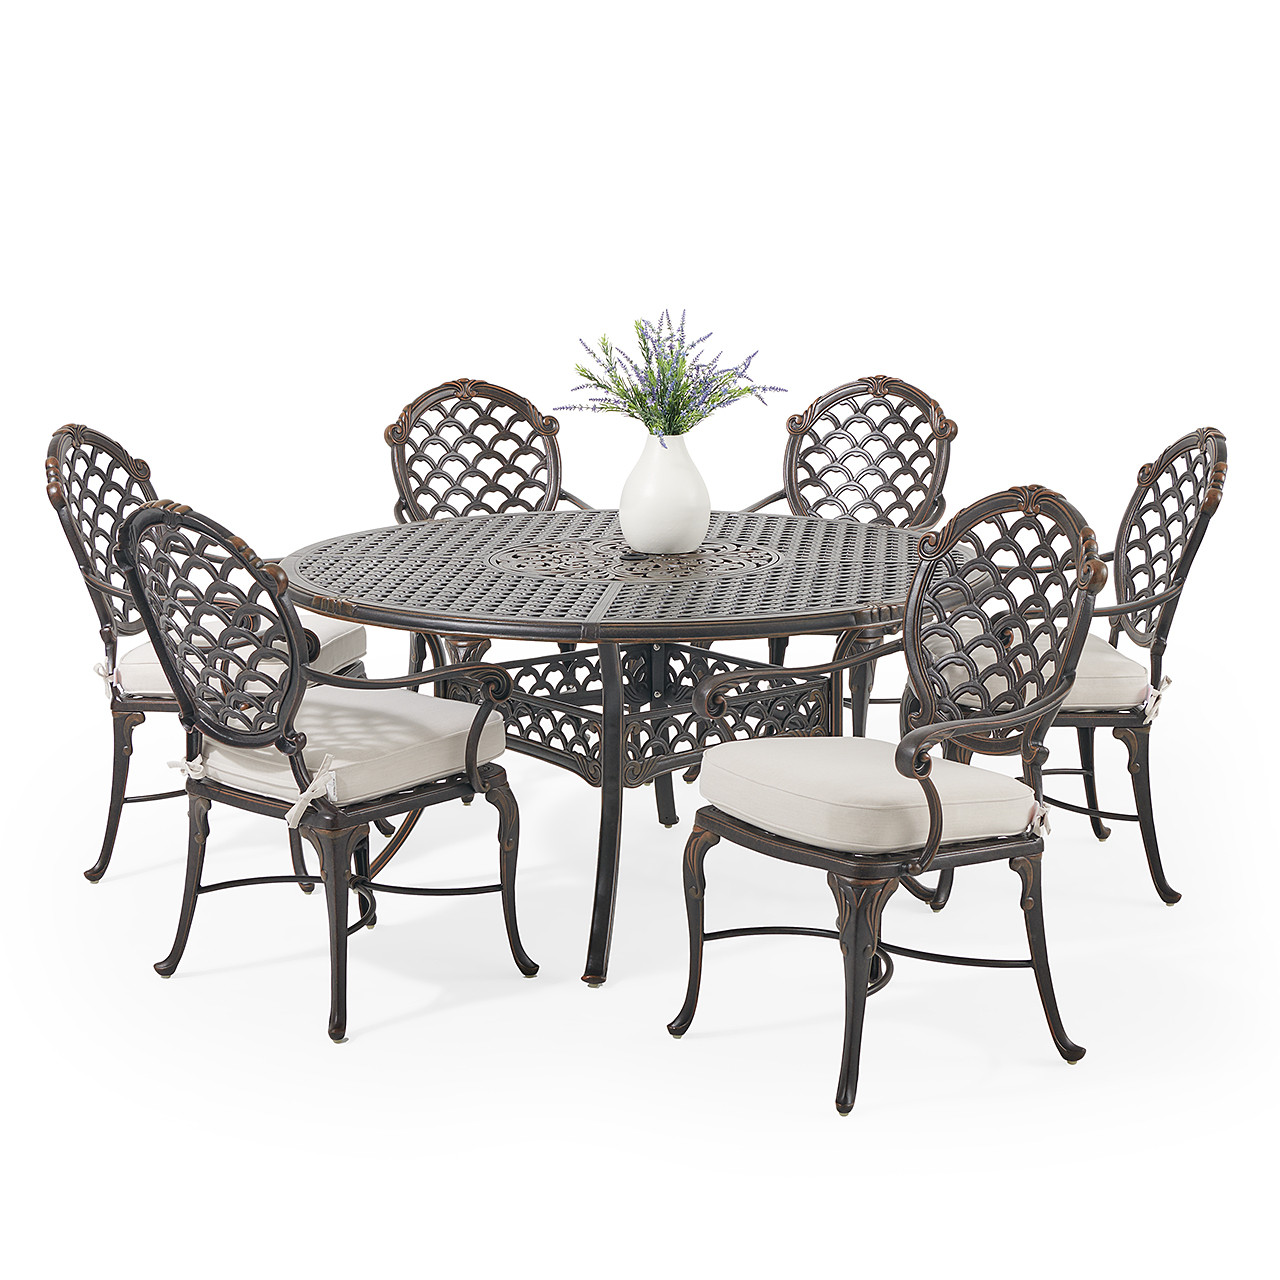 Bordeaux Golden Bronze Cast Aluminum with Cushions 7 Piece Dining Set + 60 in. D Table with Inlaid Lazy Susan